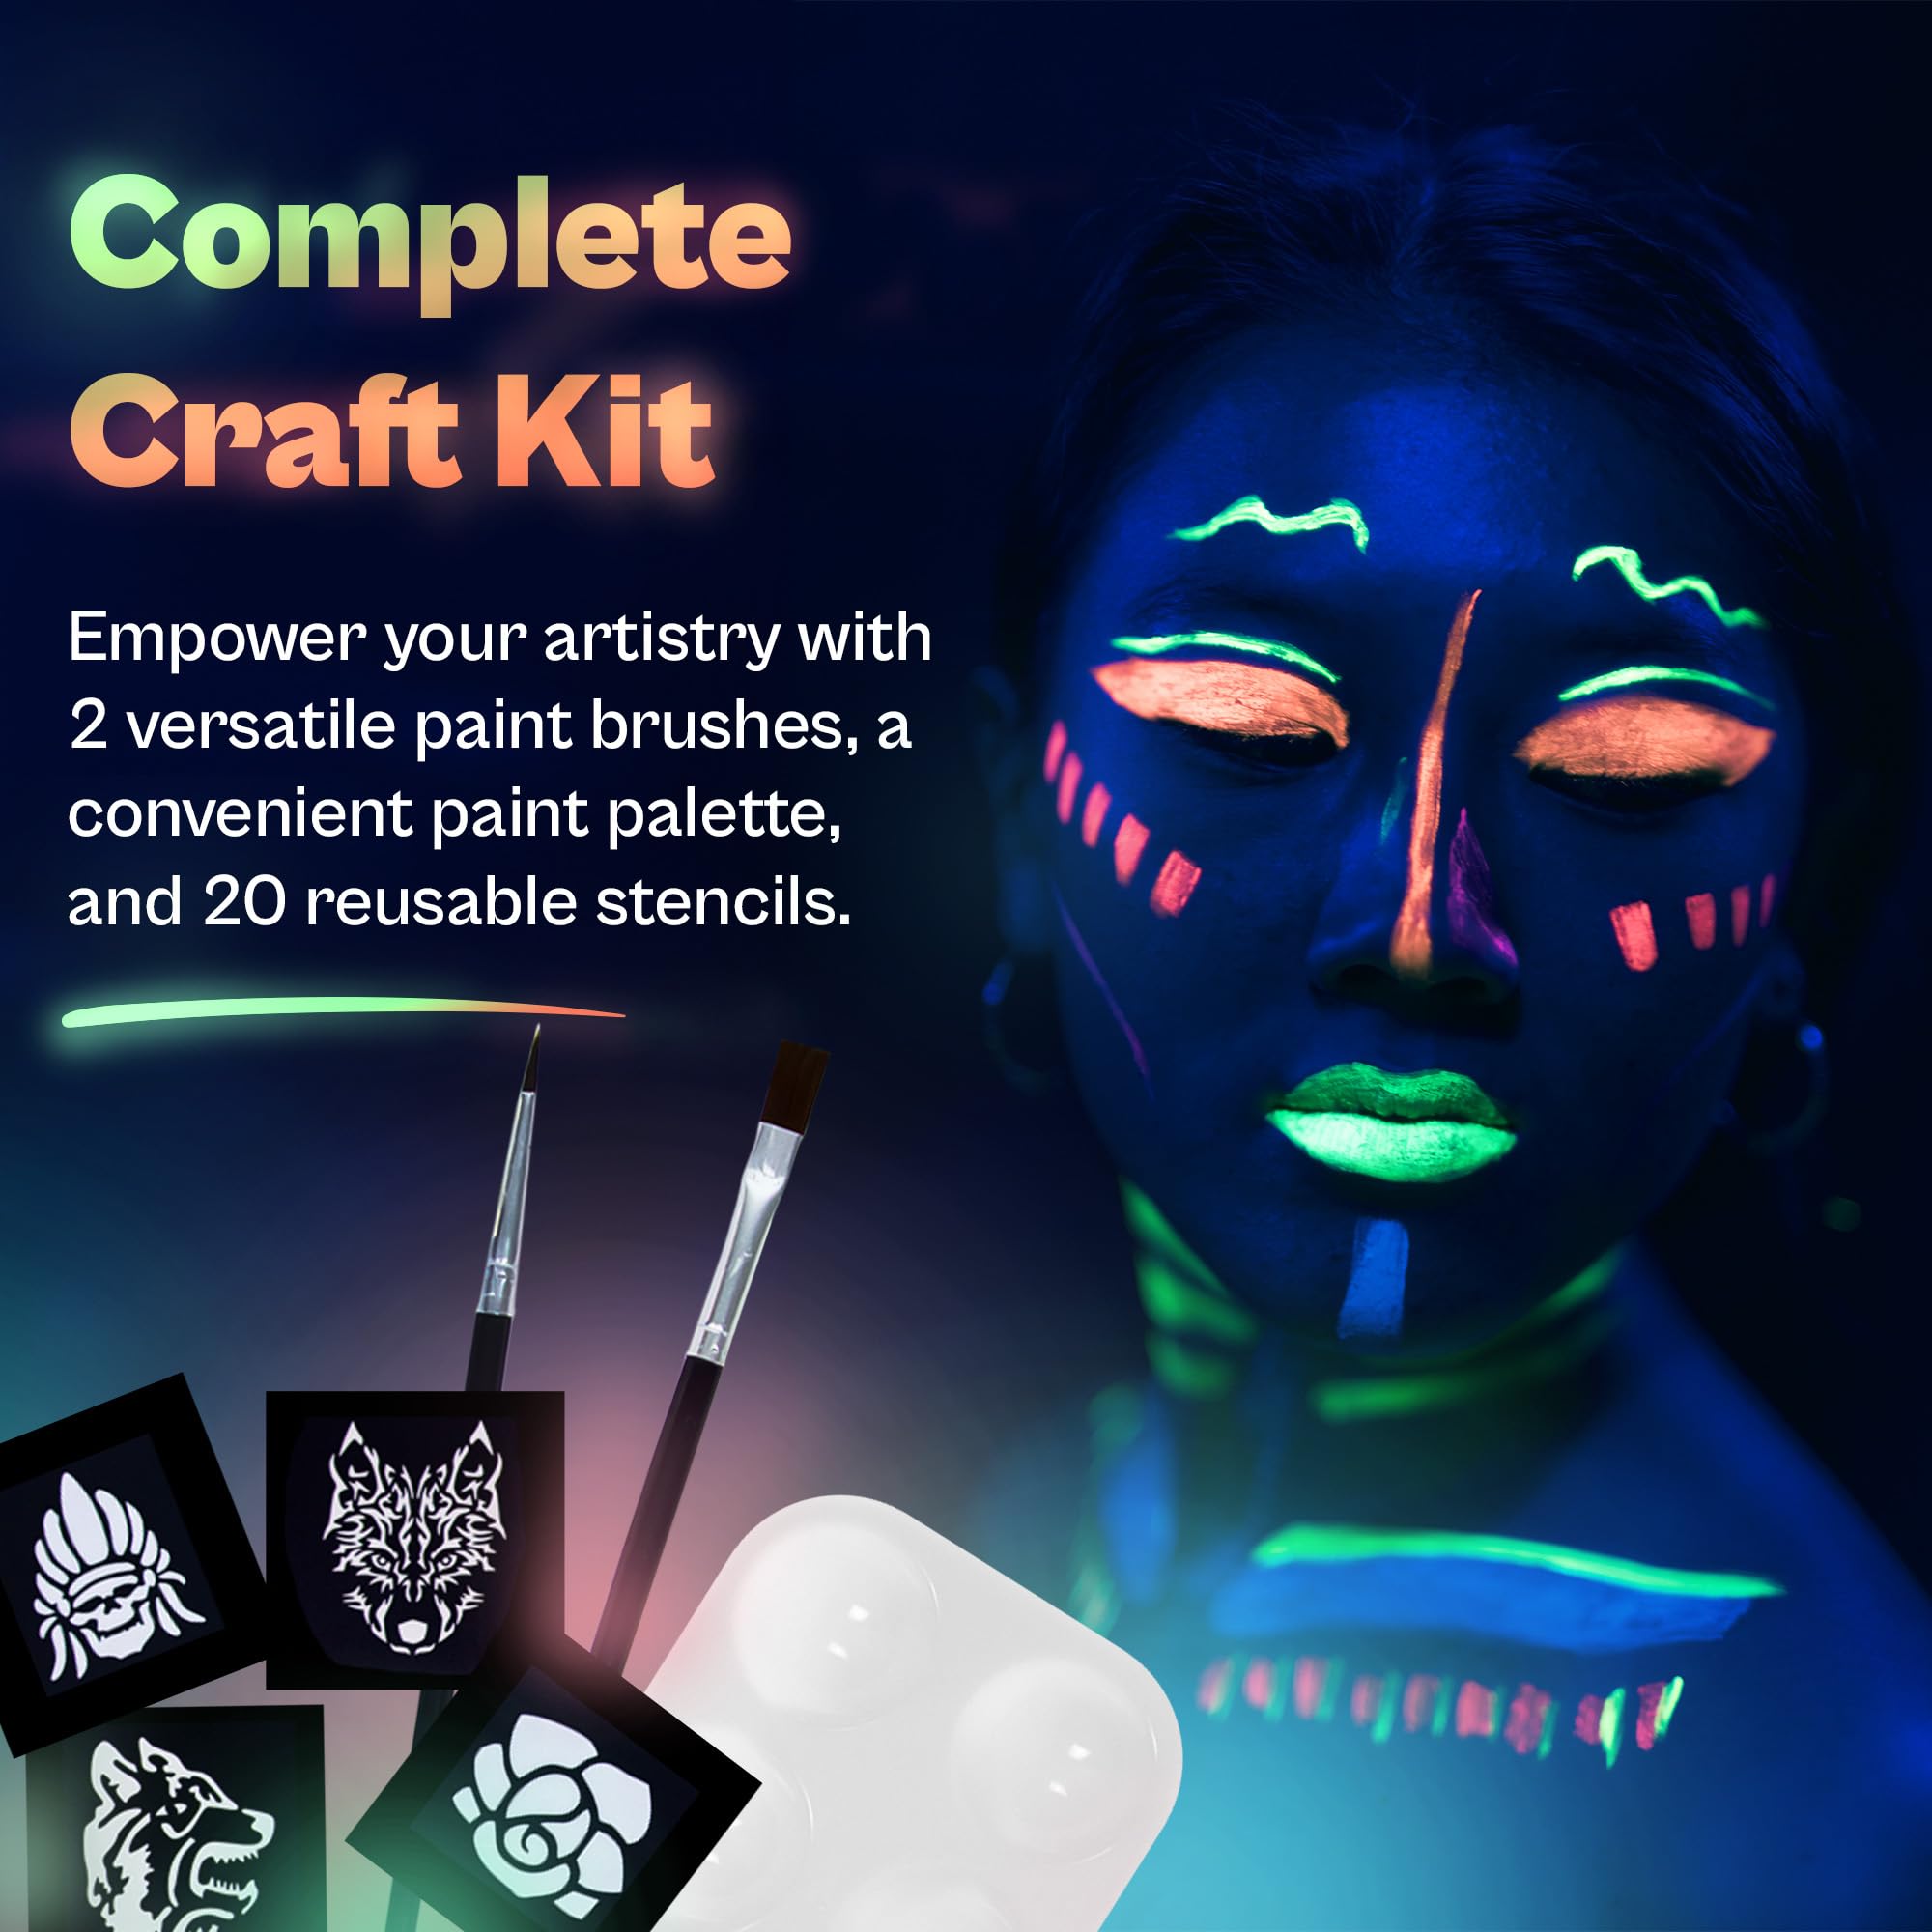 Neon Glow in the Dark UV Paint Kit - 8 Colors, Brushes, Paint Pallet, and Stencils - Self Luminous Acrylic Paints for Party Decor, Festivals, Body & Face Art - Blacklight Activated